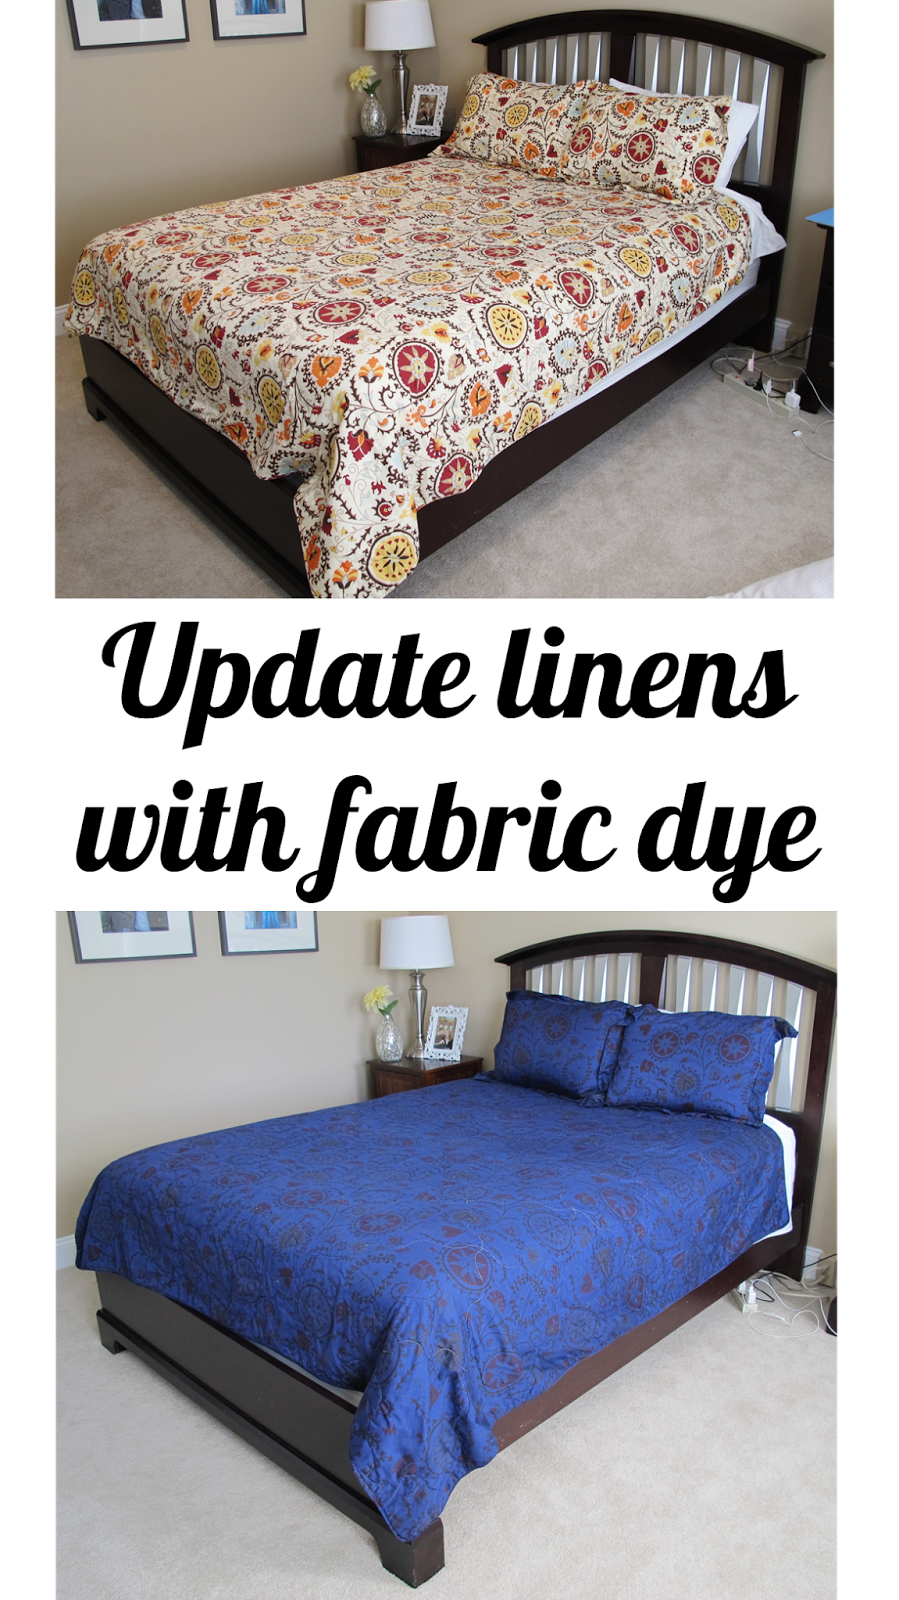 Update Linens with Fabric Dye | bonnieprojects.blogspot.com